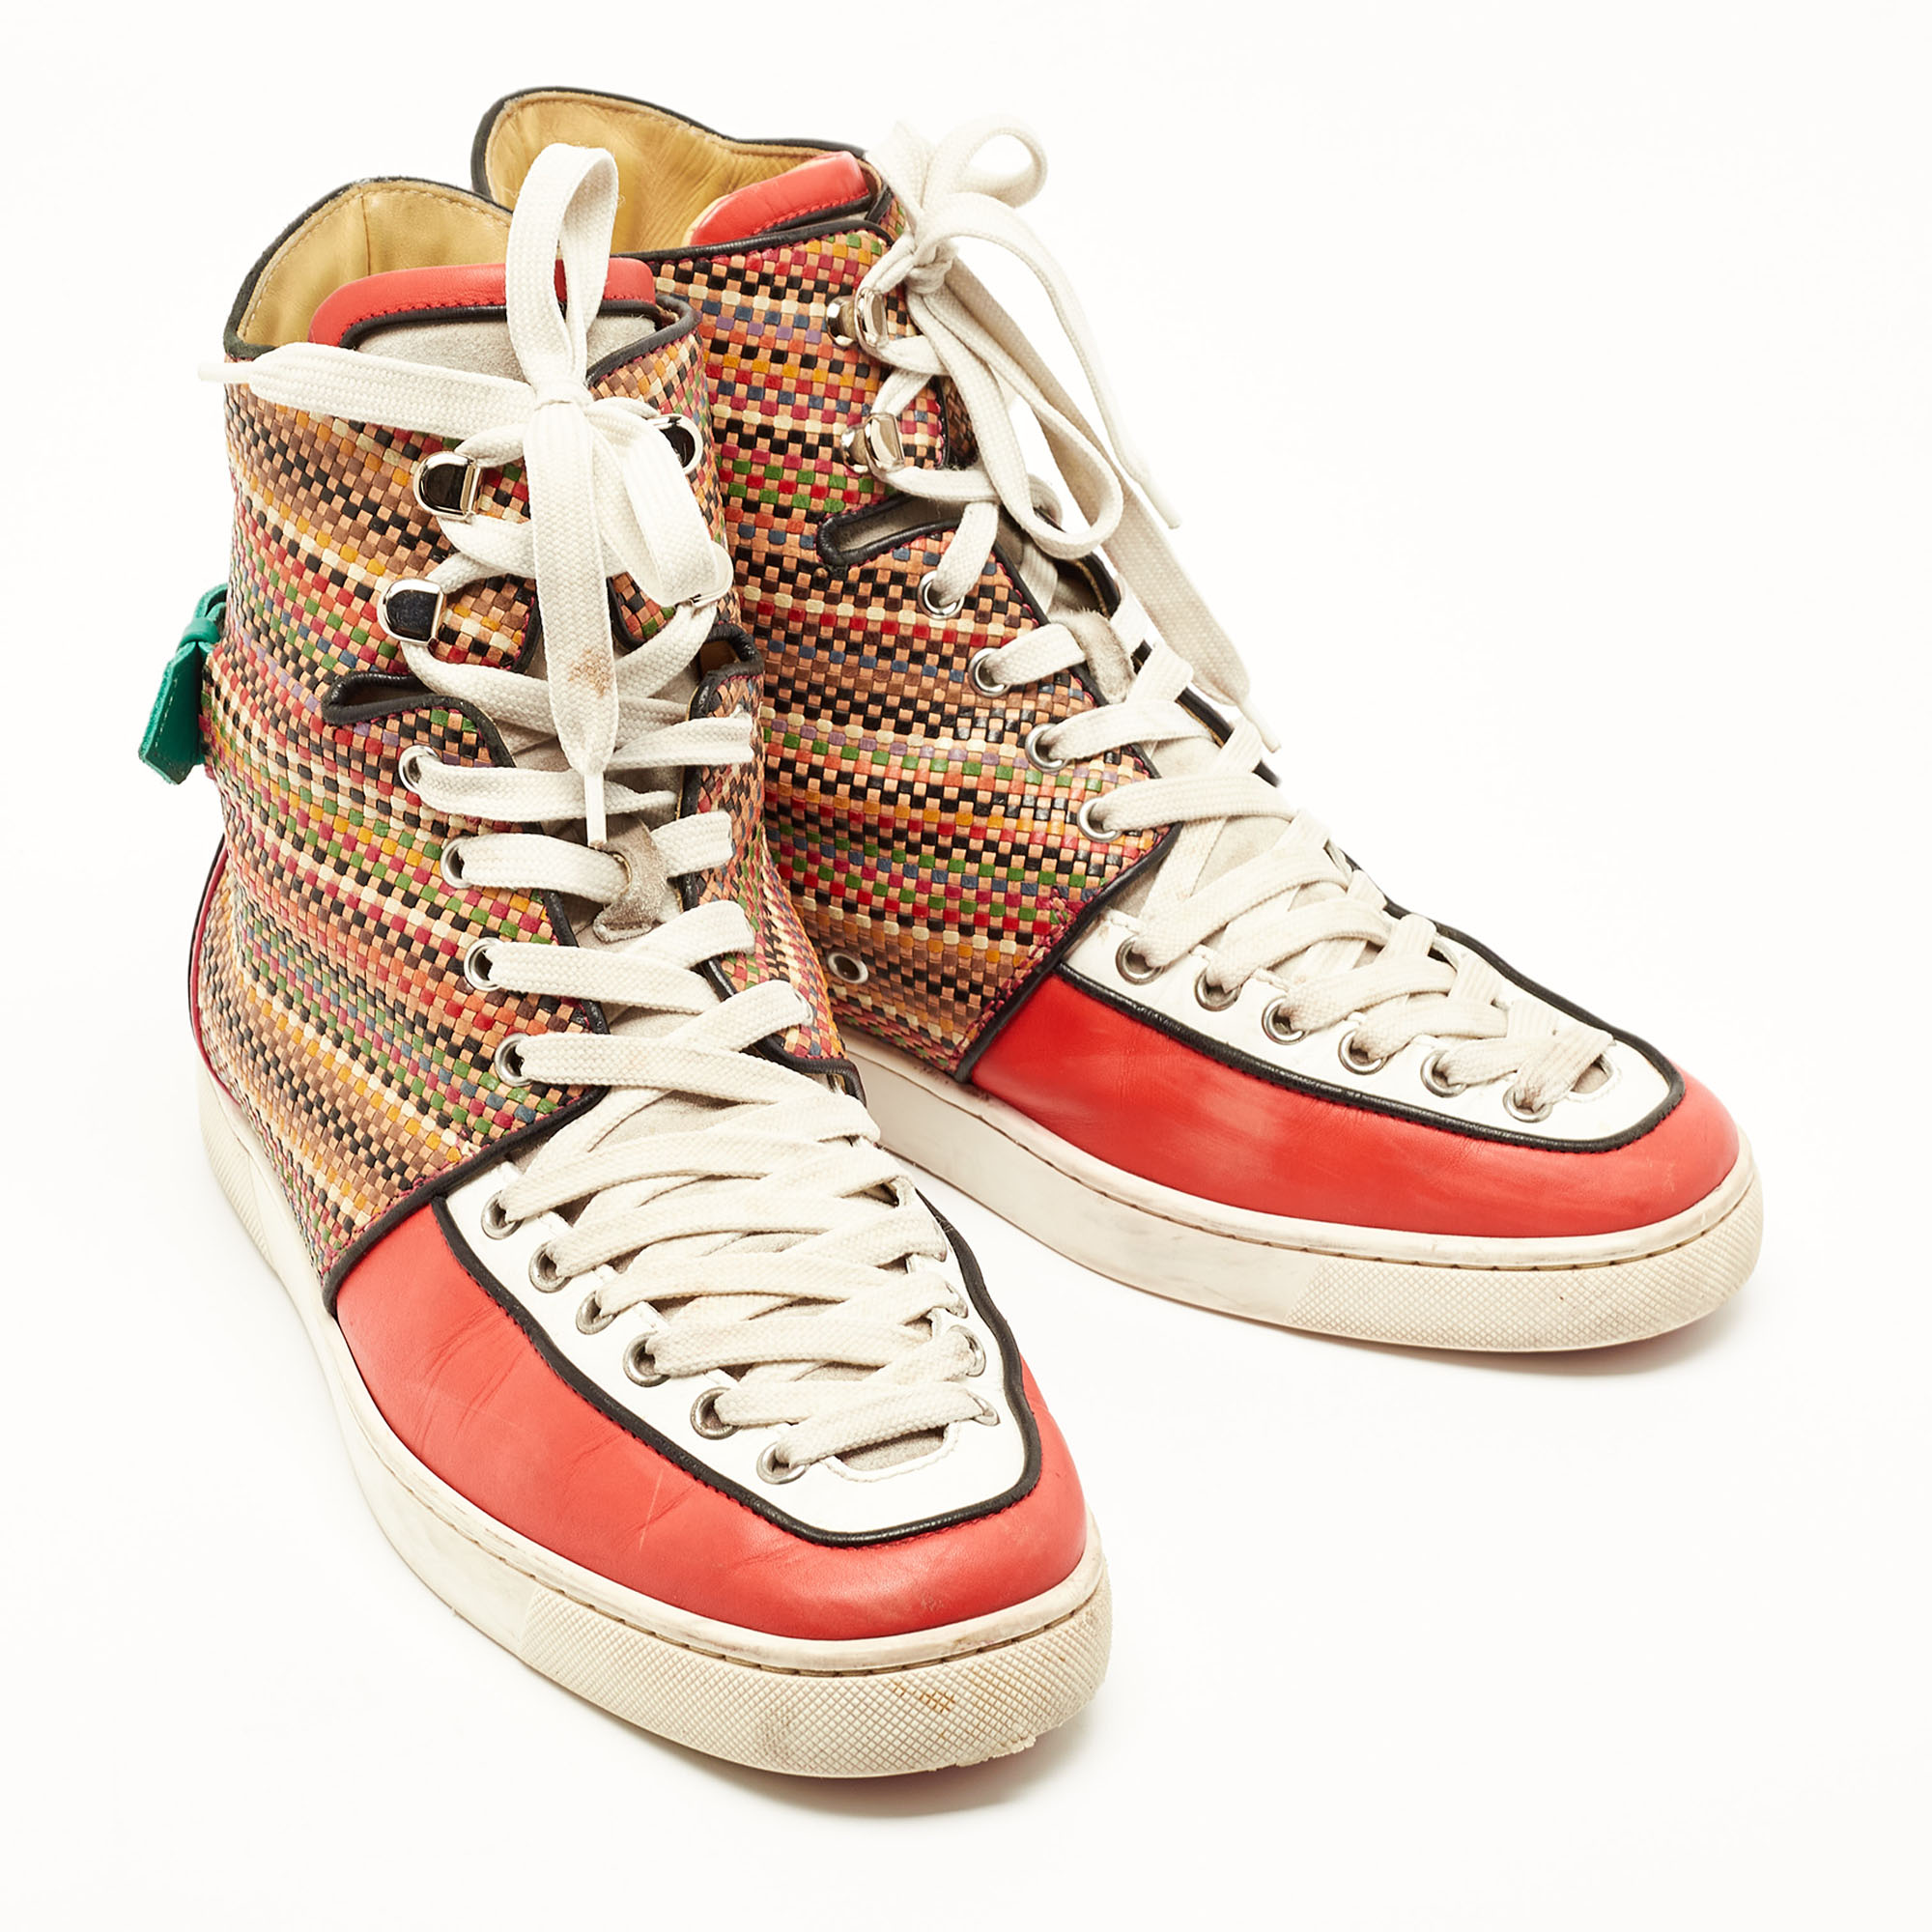 Christian Louboutin Multicolor Leather High Top Sneakers 43